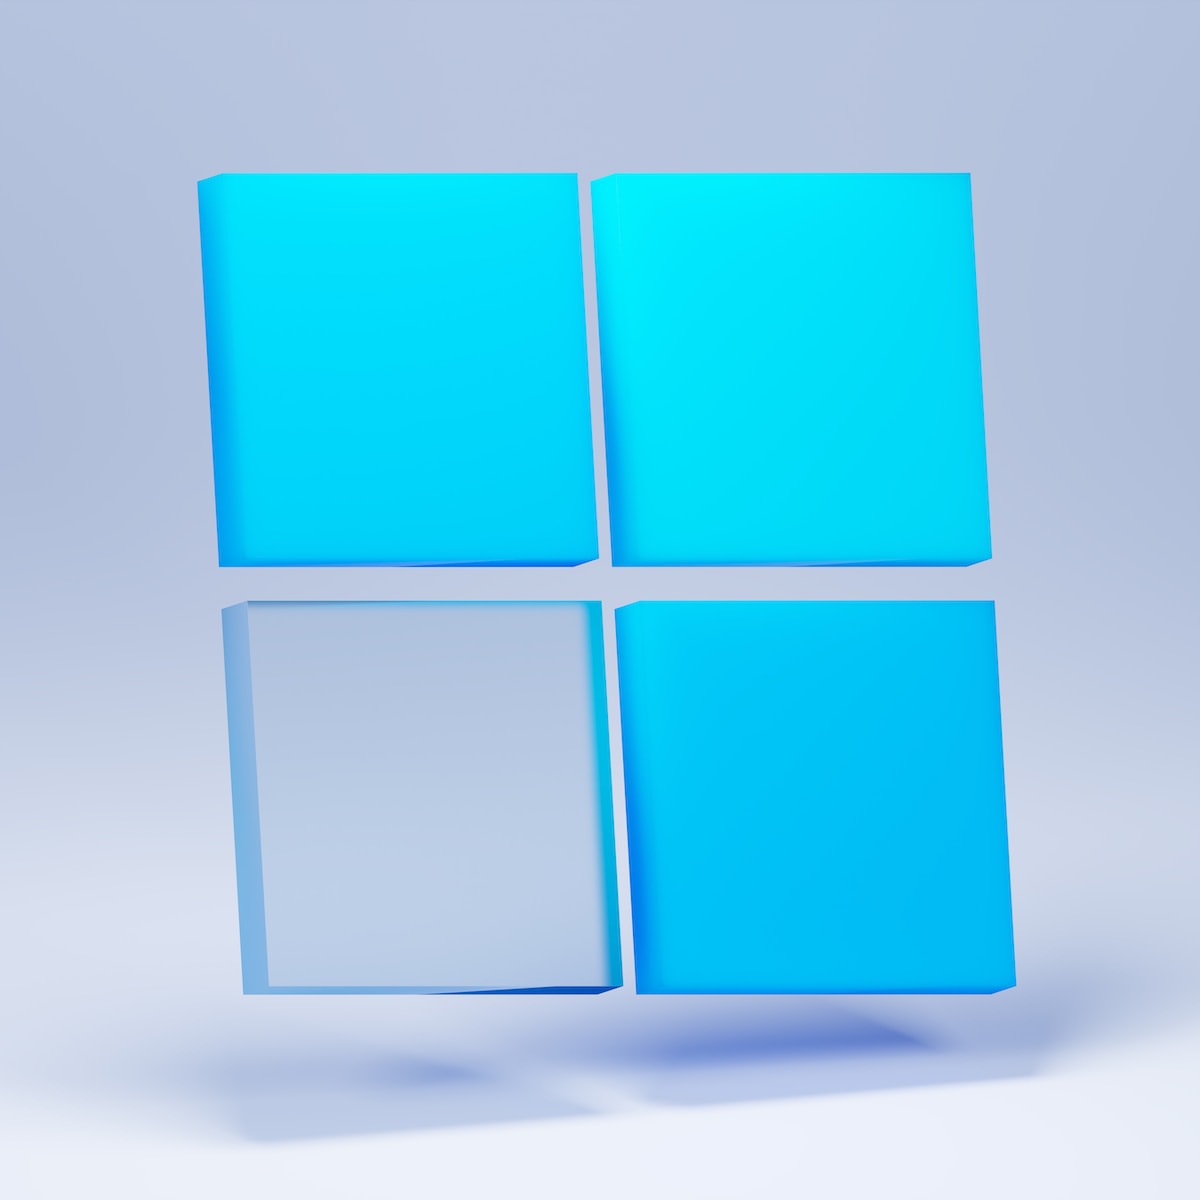 a+white+and+blue+square+object+on+a+white+background